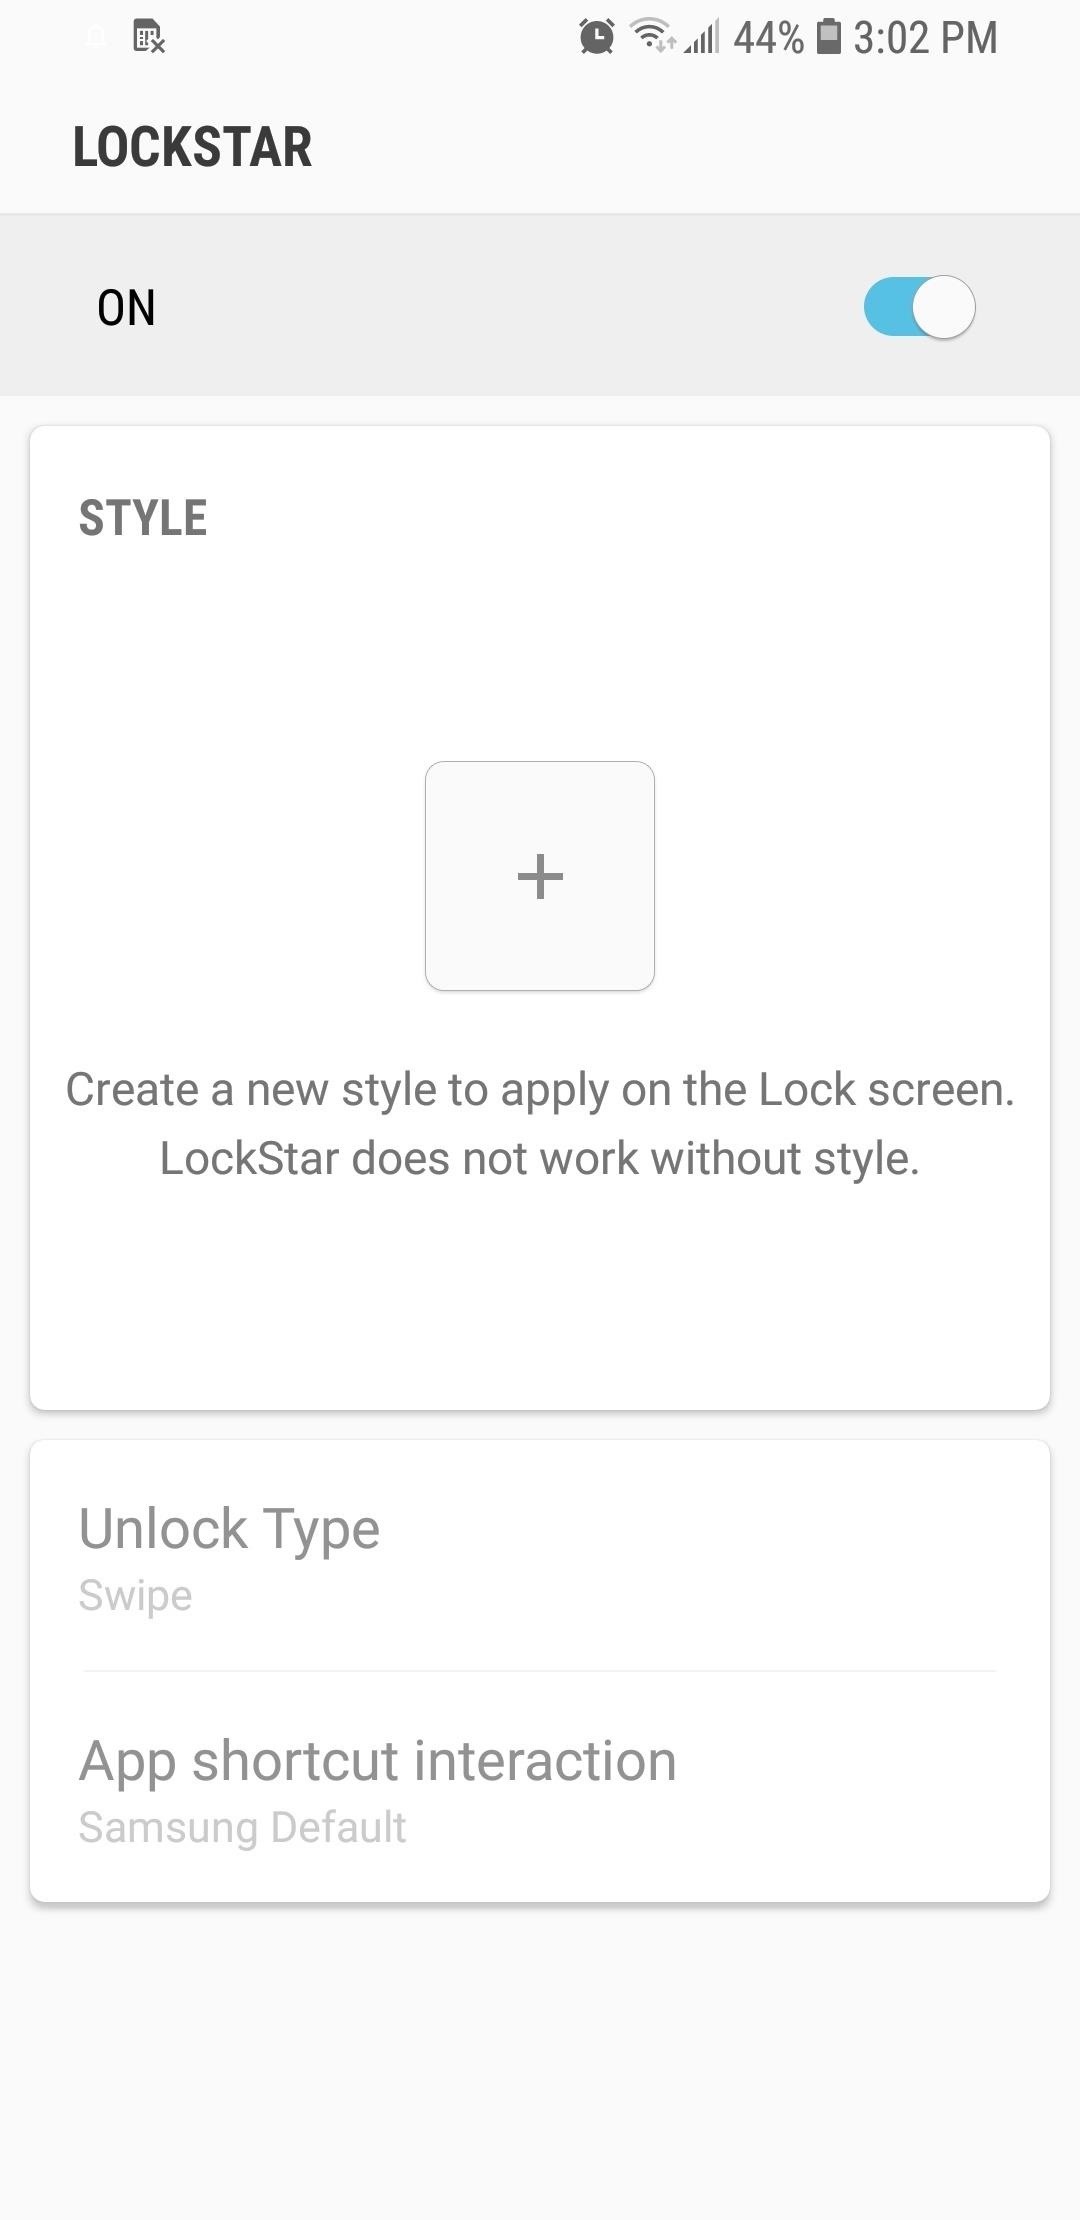 How to Install Samsung's Good Lock App to Customize Your Galaxy